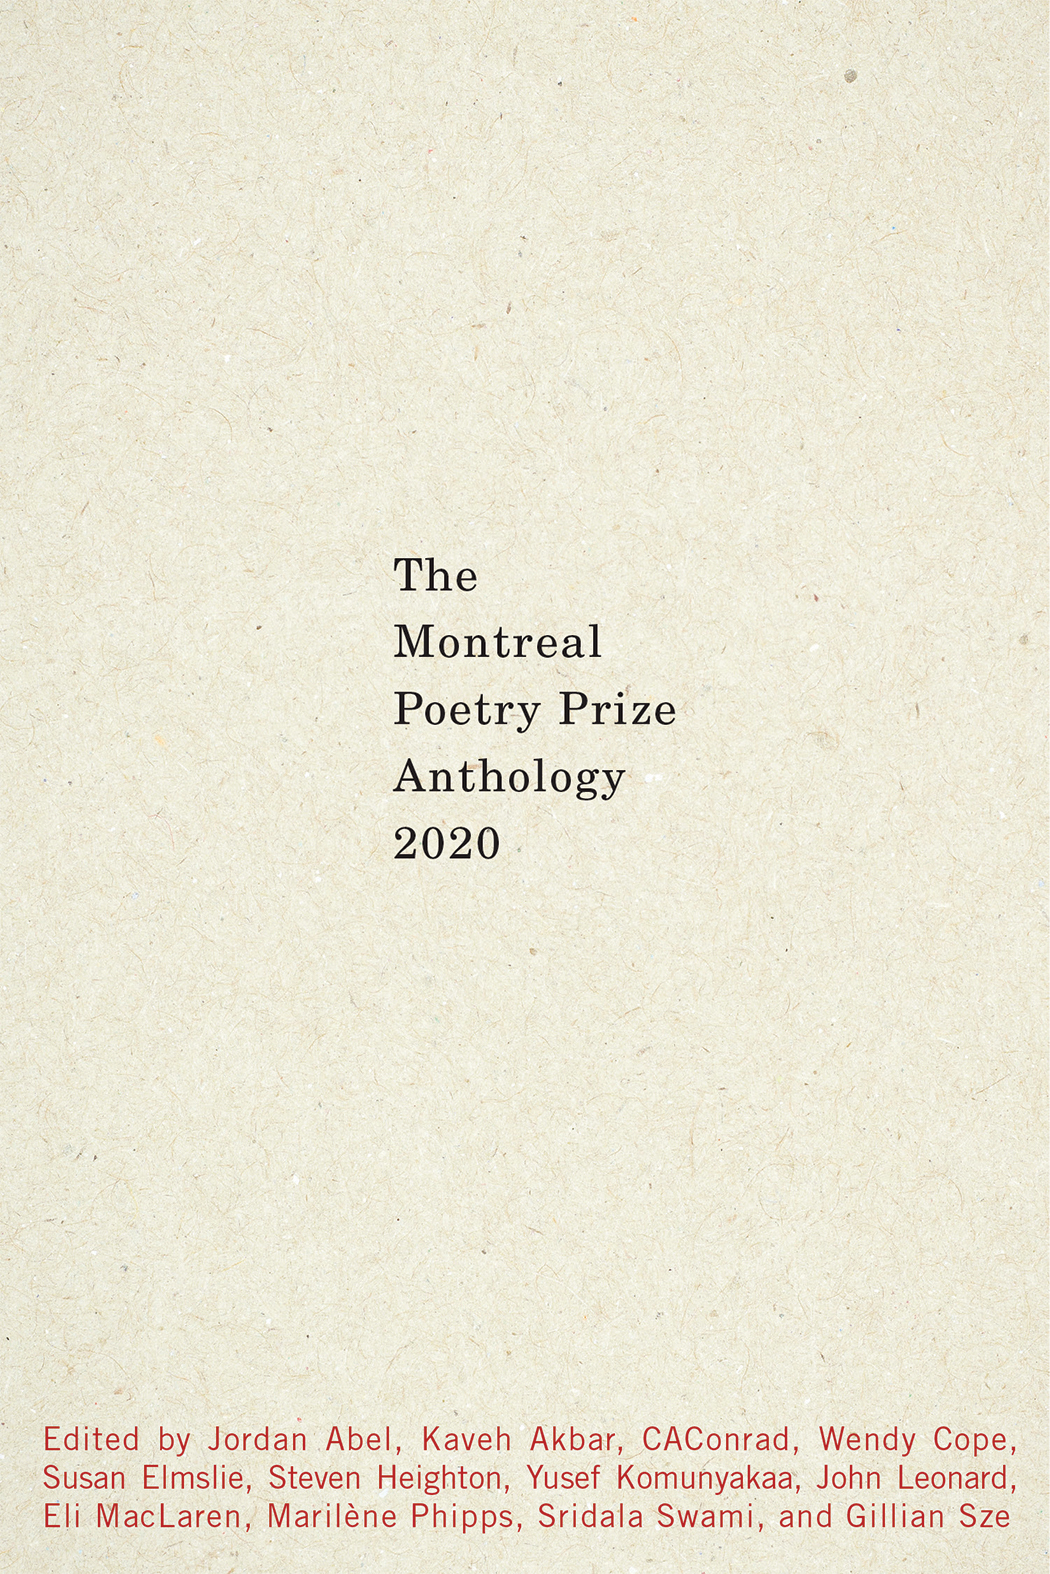 The Montreal Prize Anthology 2020